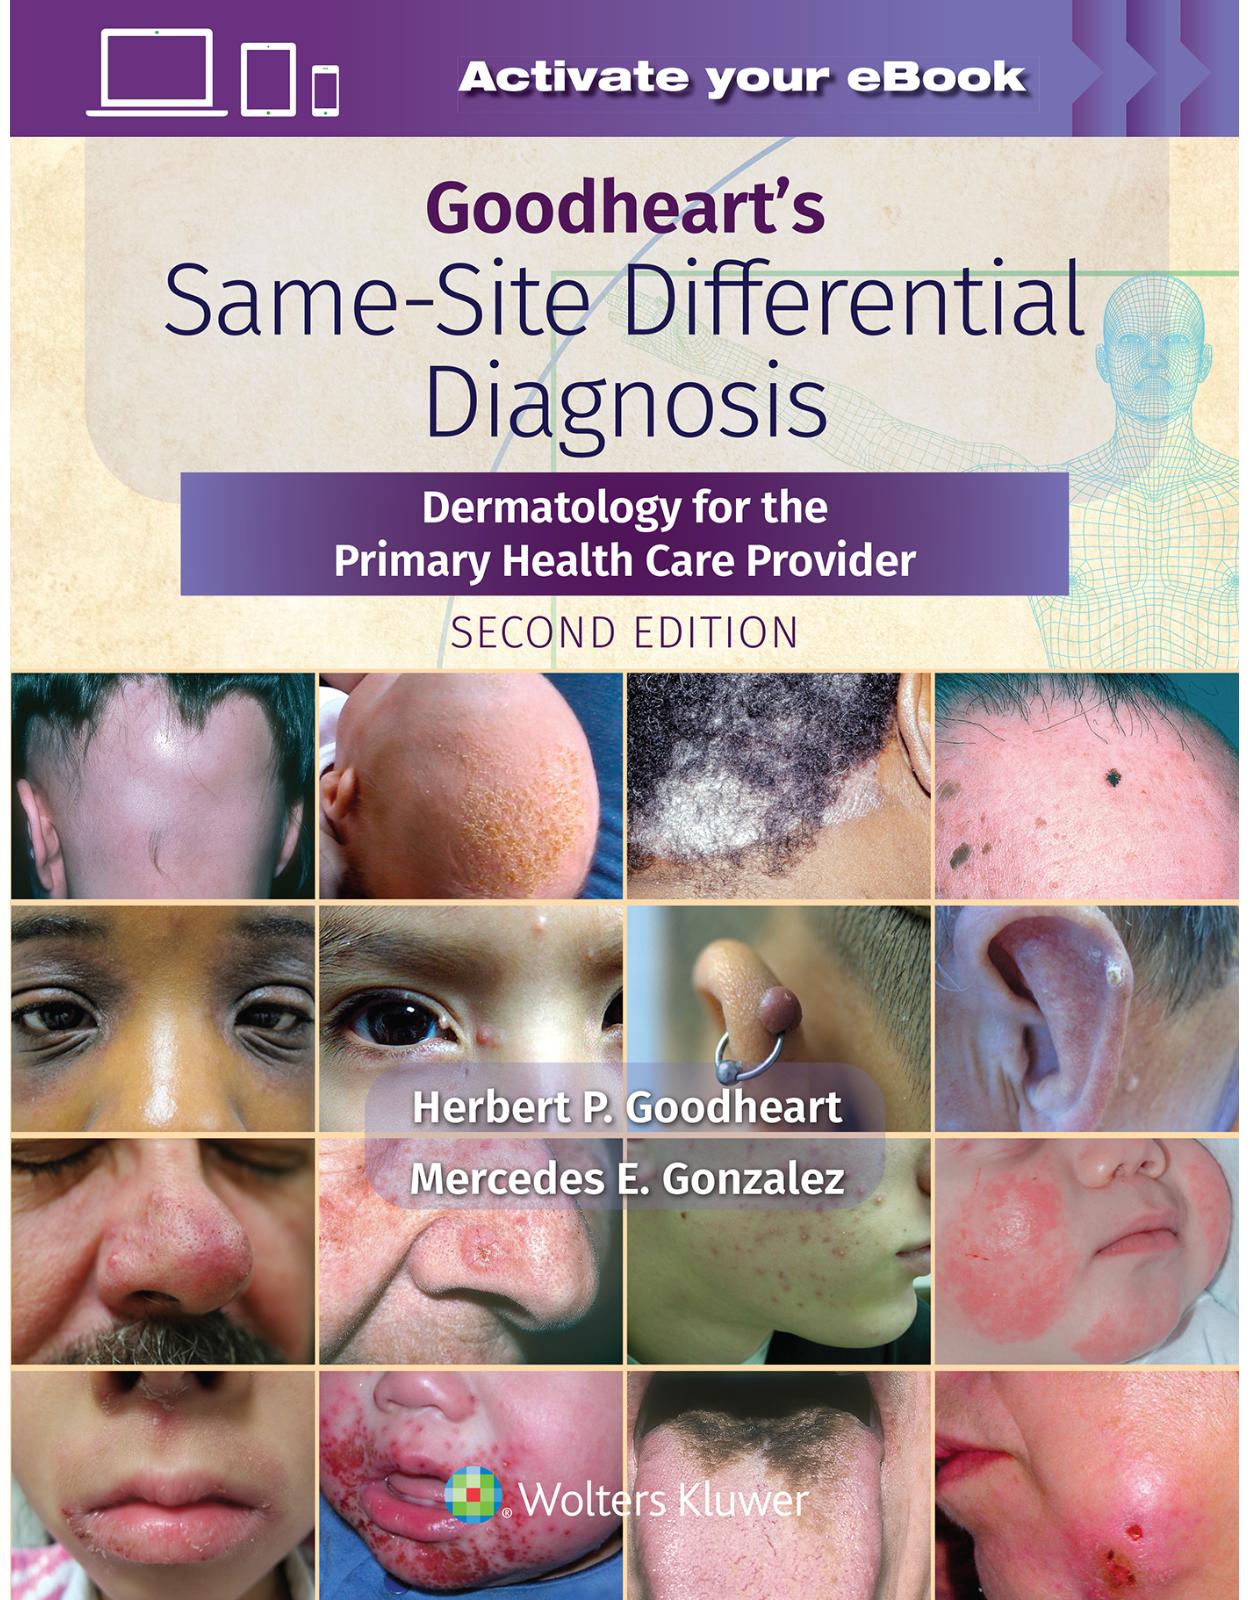 Goodheart’s Same-Site Differential Diagnosis Dermatology for the Primary Health Care Provider, Second edition